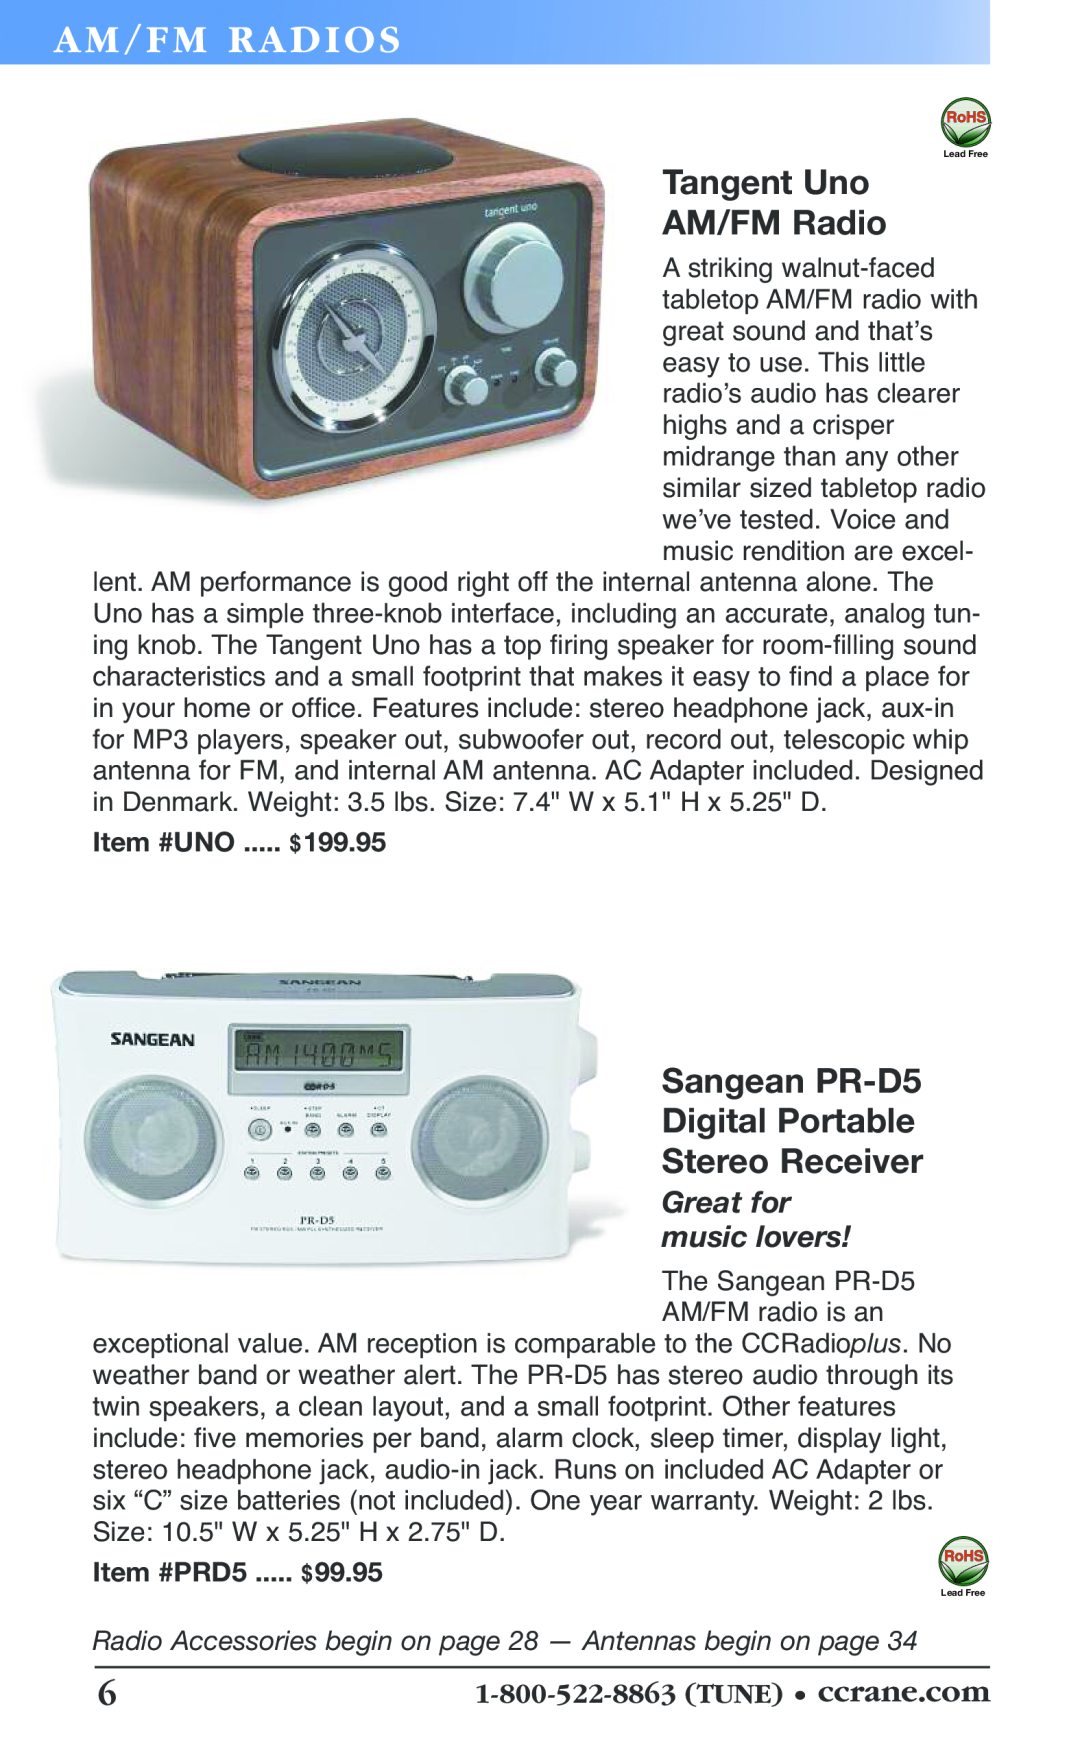 C. Crane 19f manual Tangent Uno AM/FM Radio, Sangean PR-D5 Digital Portable Stereo Receiver, Great for music lovers, $99.95 